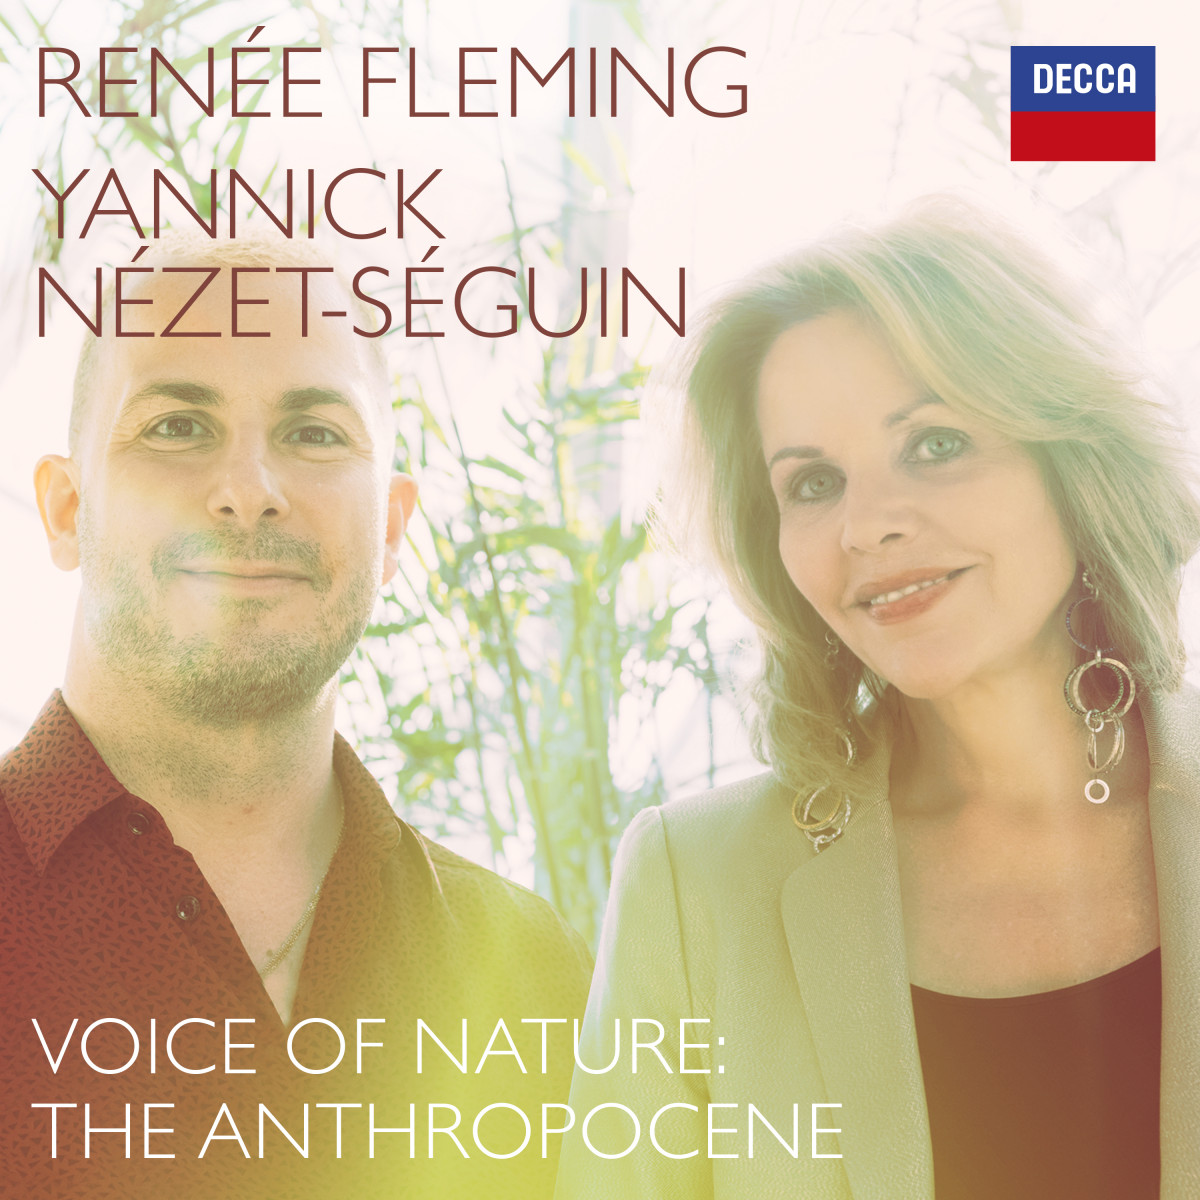 Renee Flemming – Voice of Nature